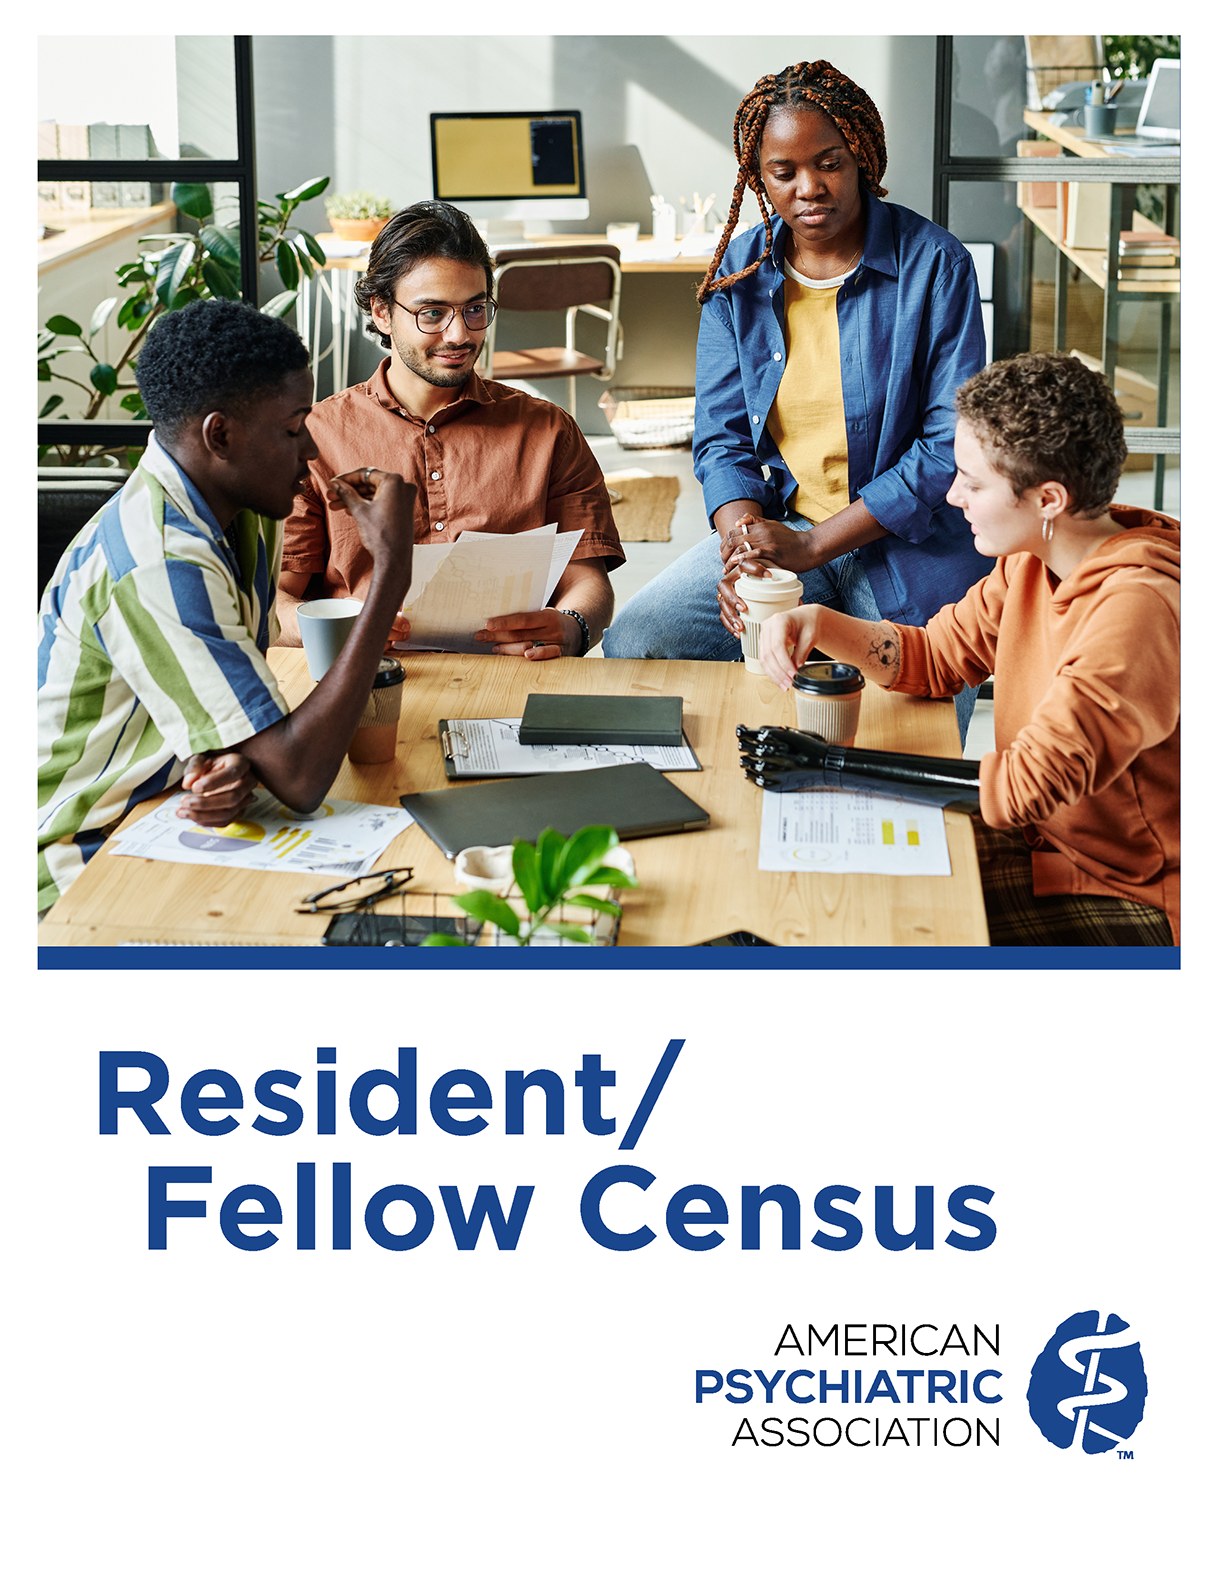 Cover of the 2020 Resident Fellow Census from the American Psychiatric Association